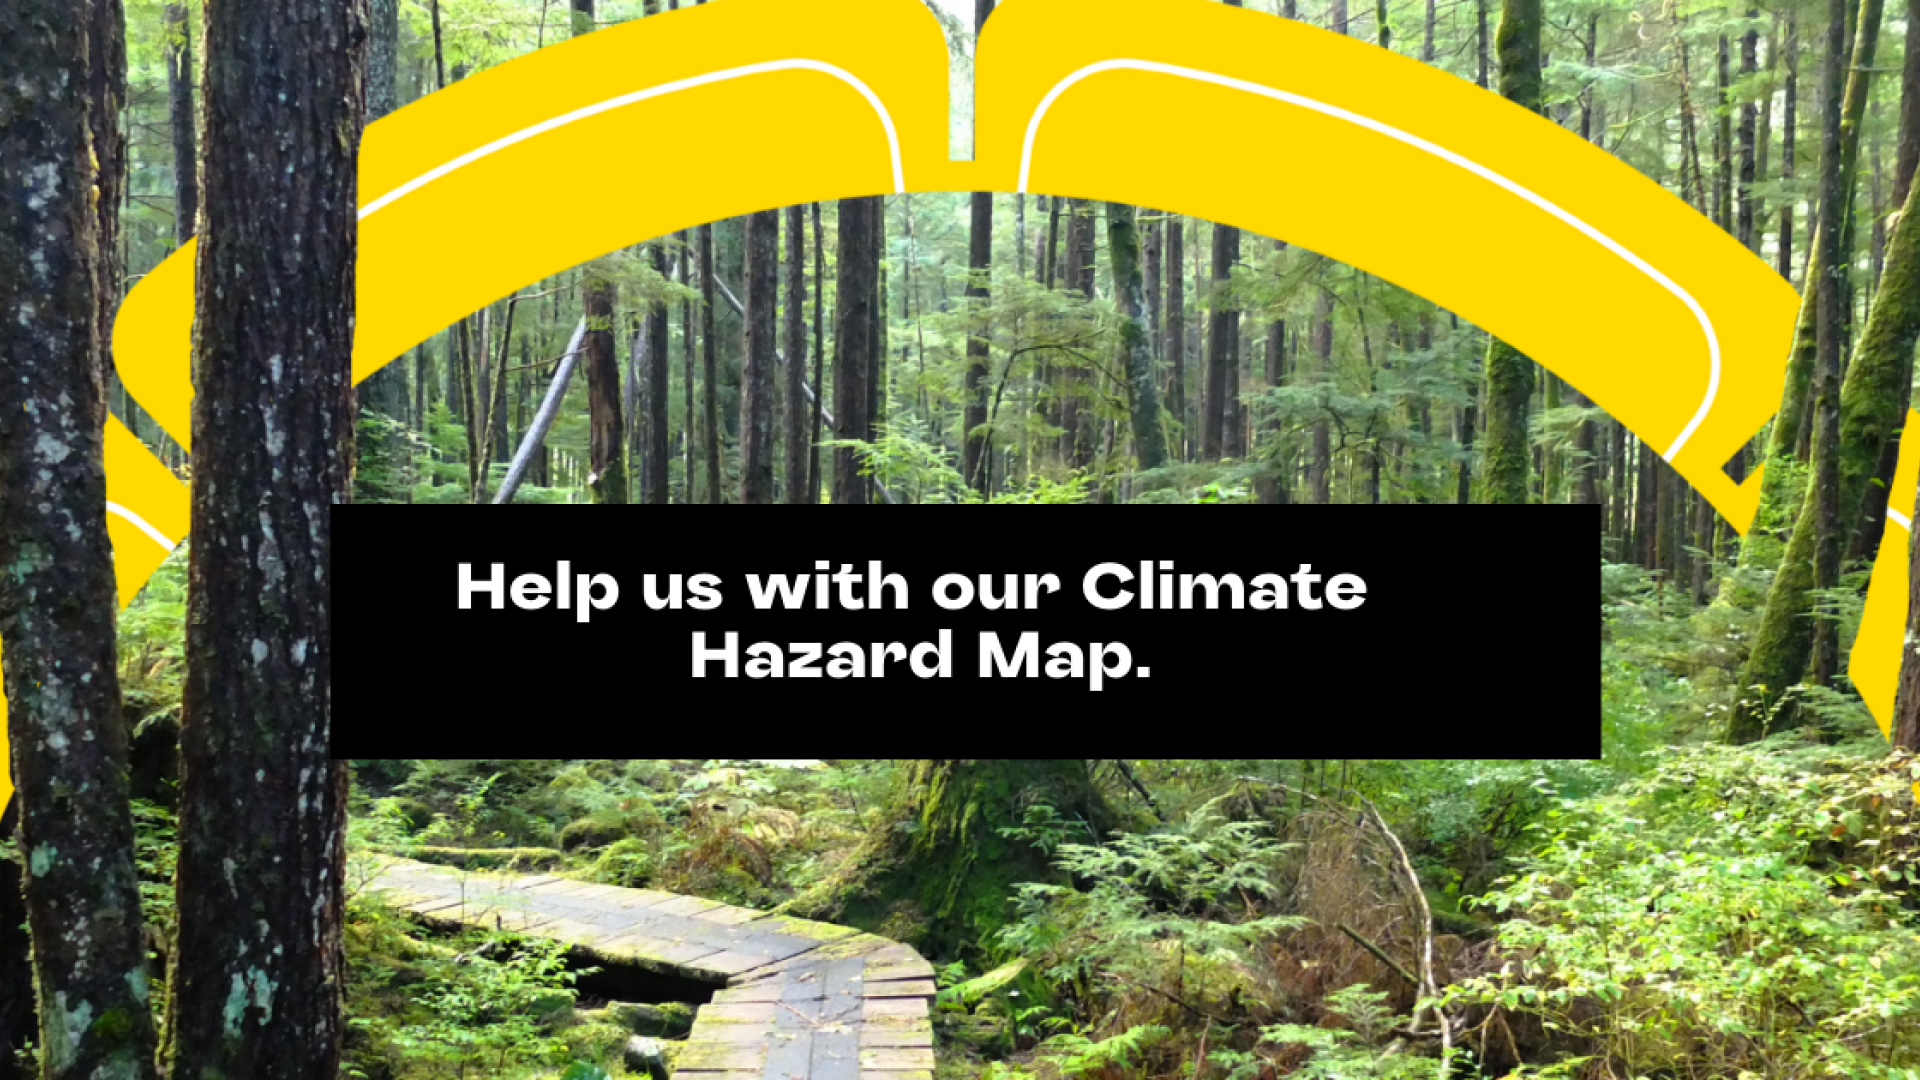 Image of trail with City rainbow arch in background and 'help us with our climate hazard map' in the foreground.